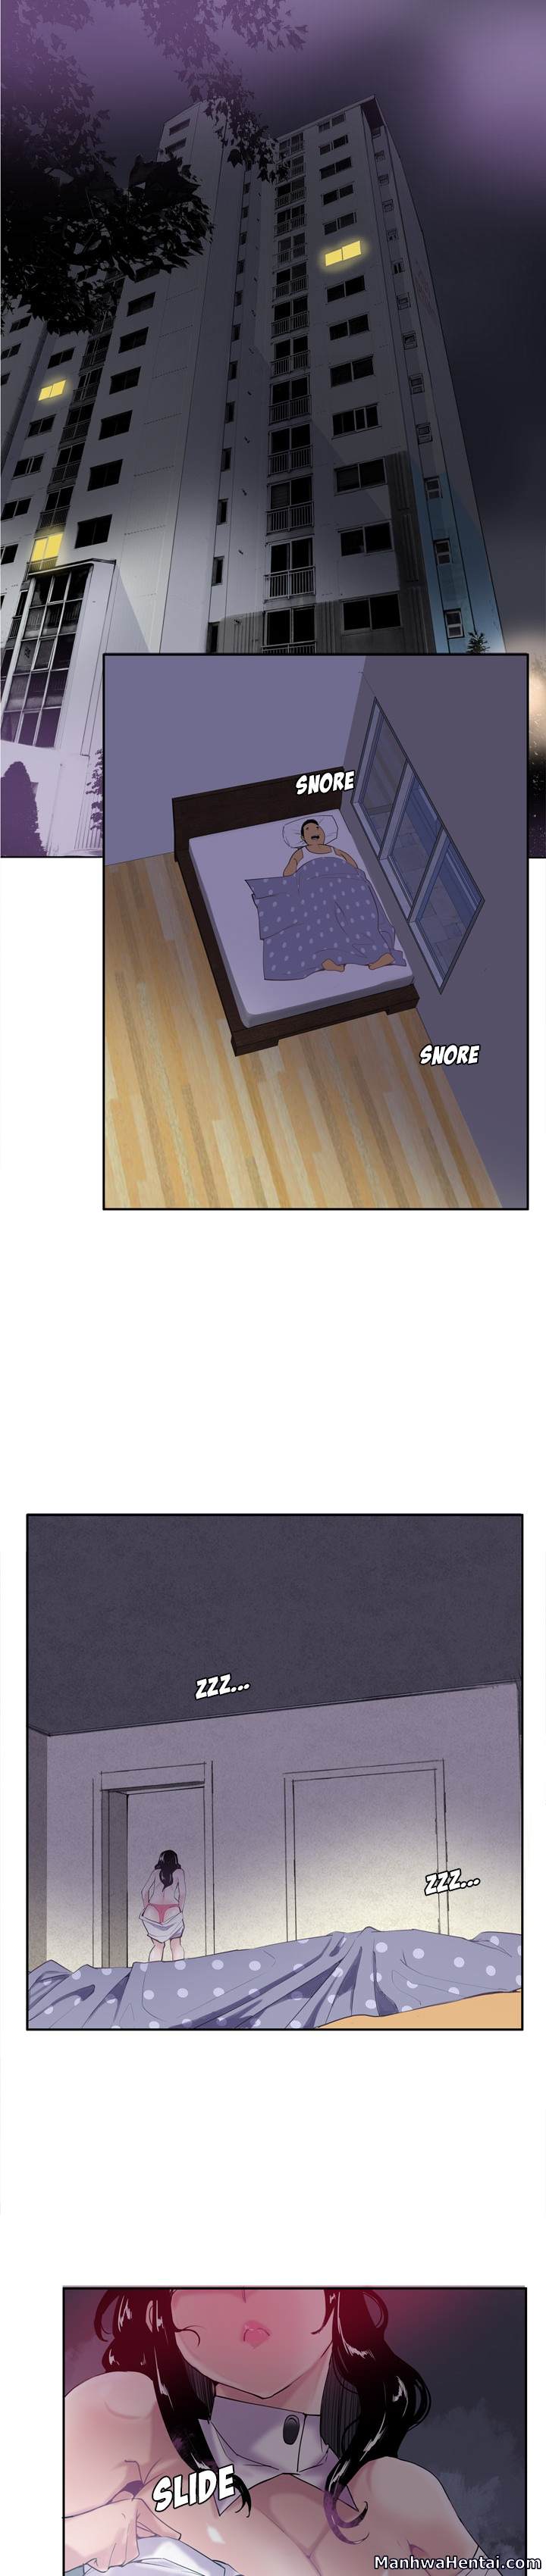 The Desperate Housewife - Chapter 1 Page 1